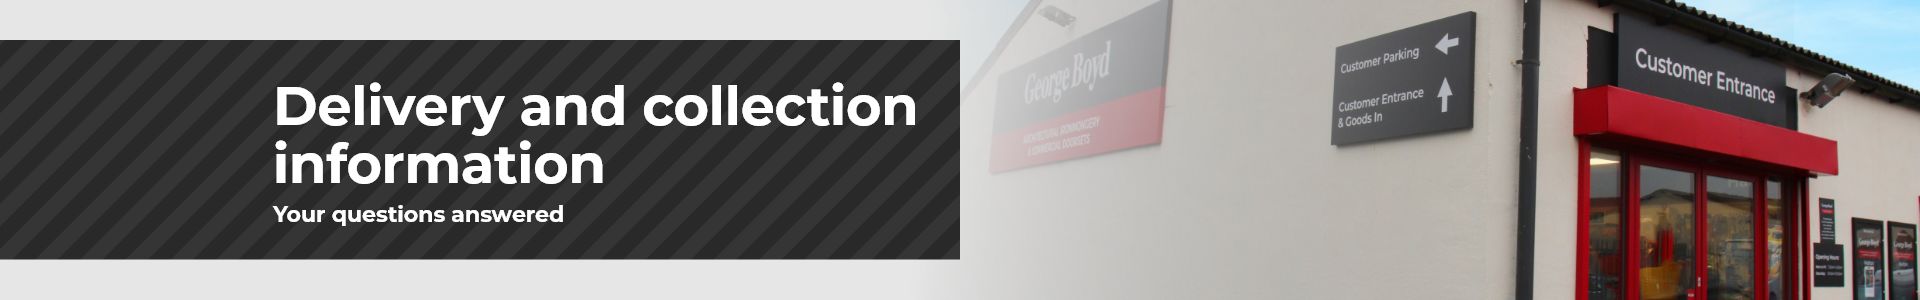 George Boyd delivery and collection information